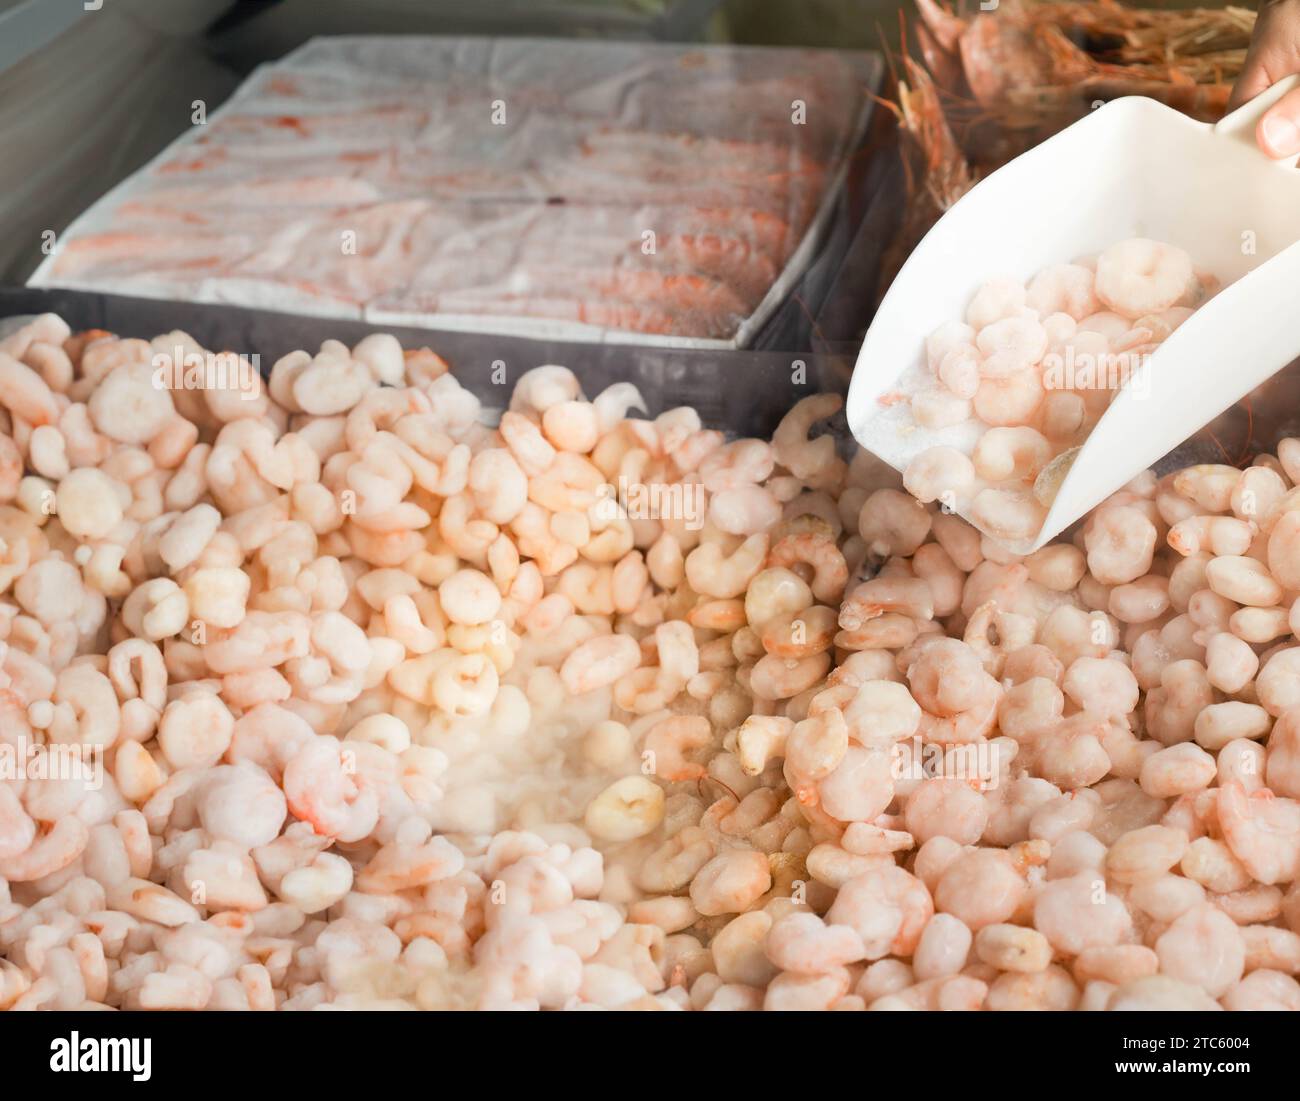 Quick frozen peeled shrimps in a fish market. Close-up shooting of seafood in a display. Stock Photo